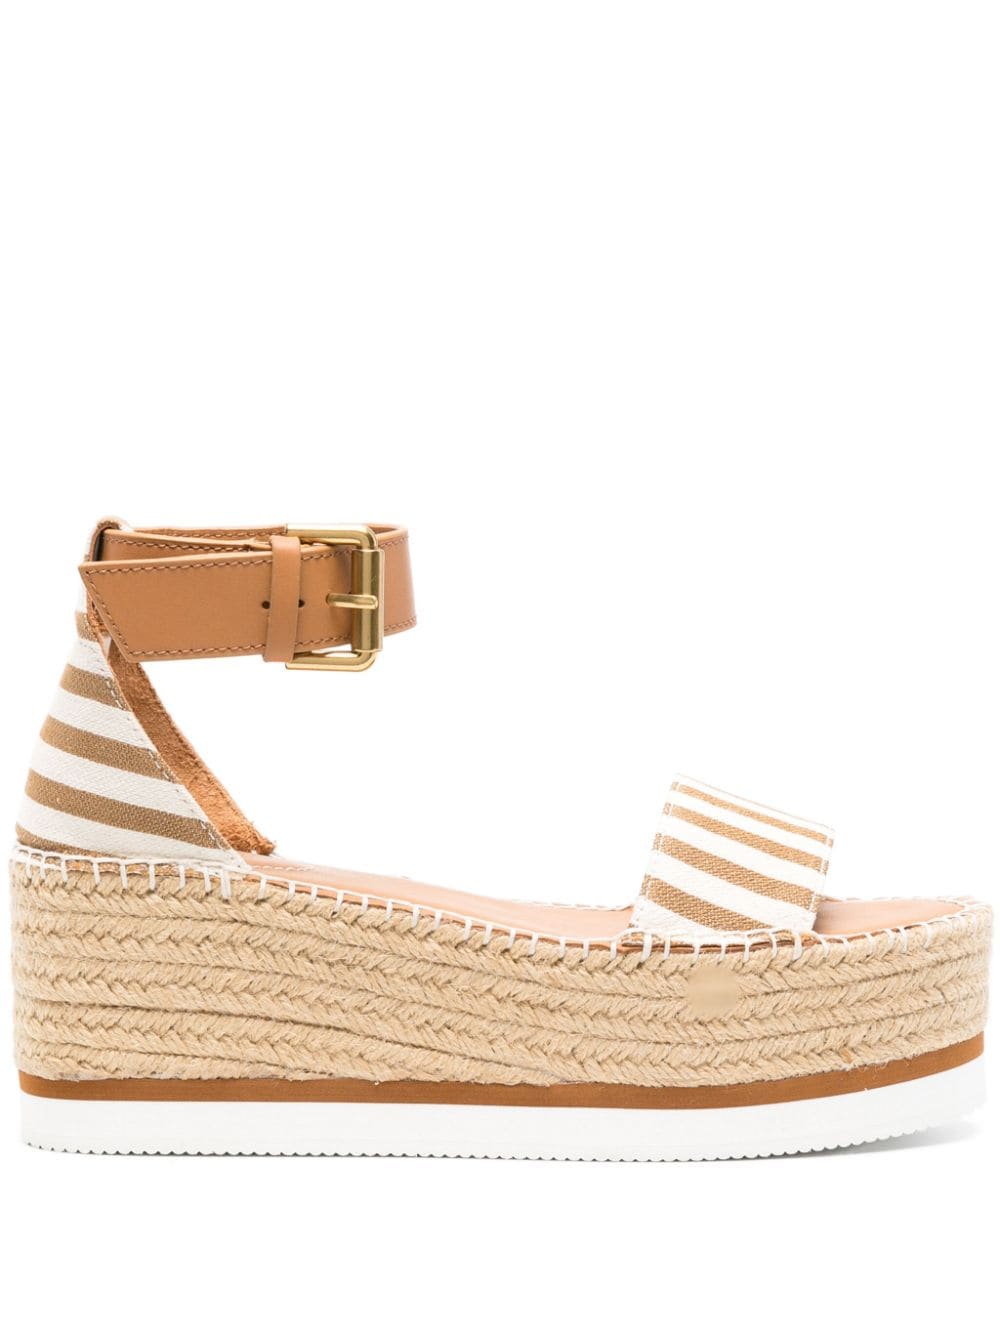 See by Chloé Espadrilles mit Plateau - Nude von See by Chloé